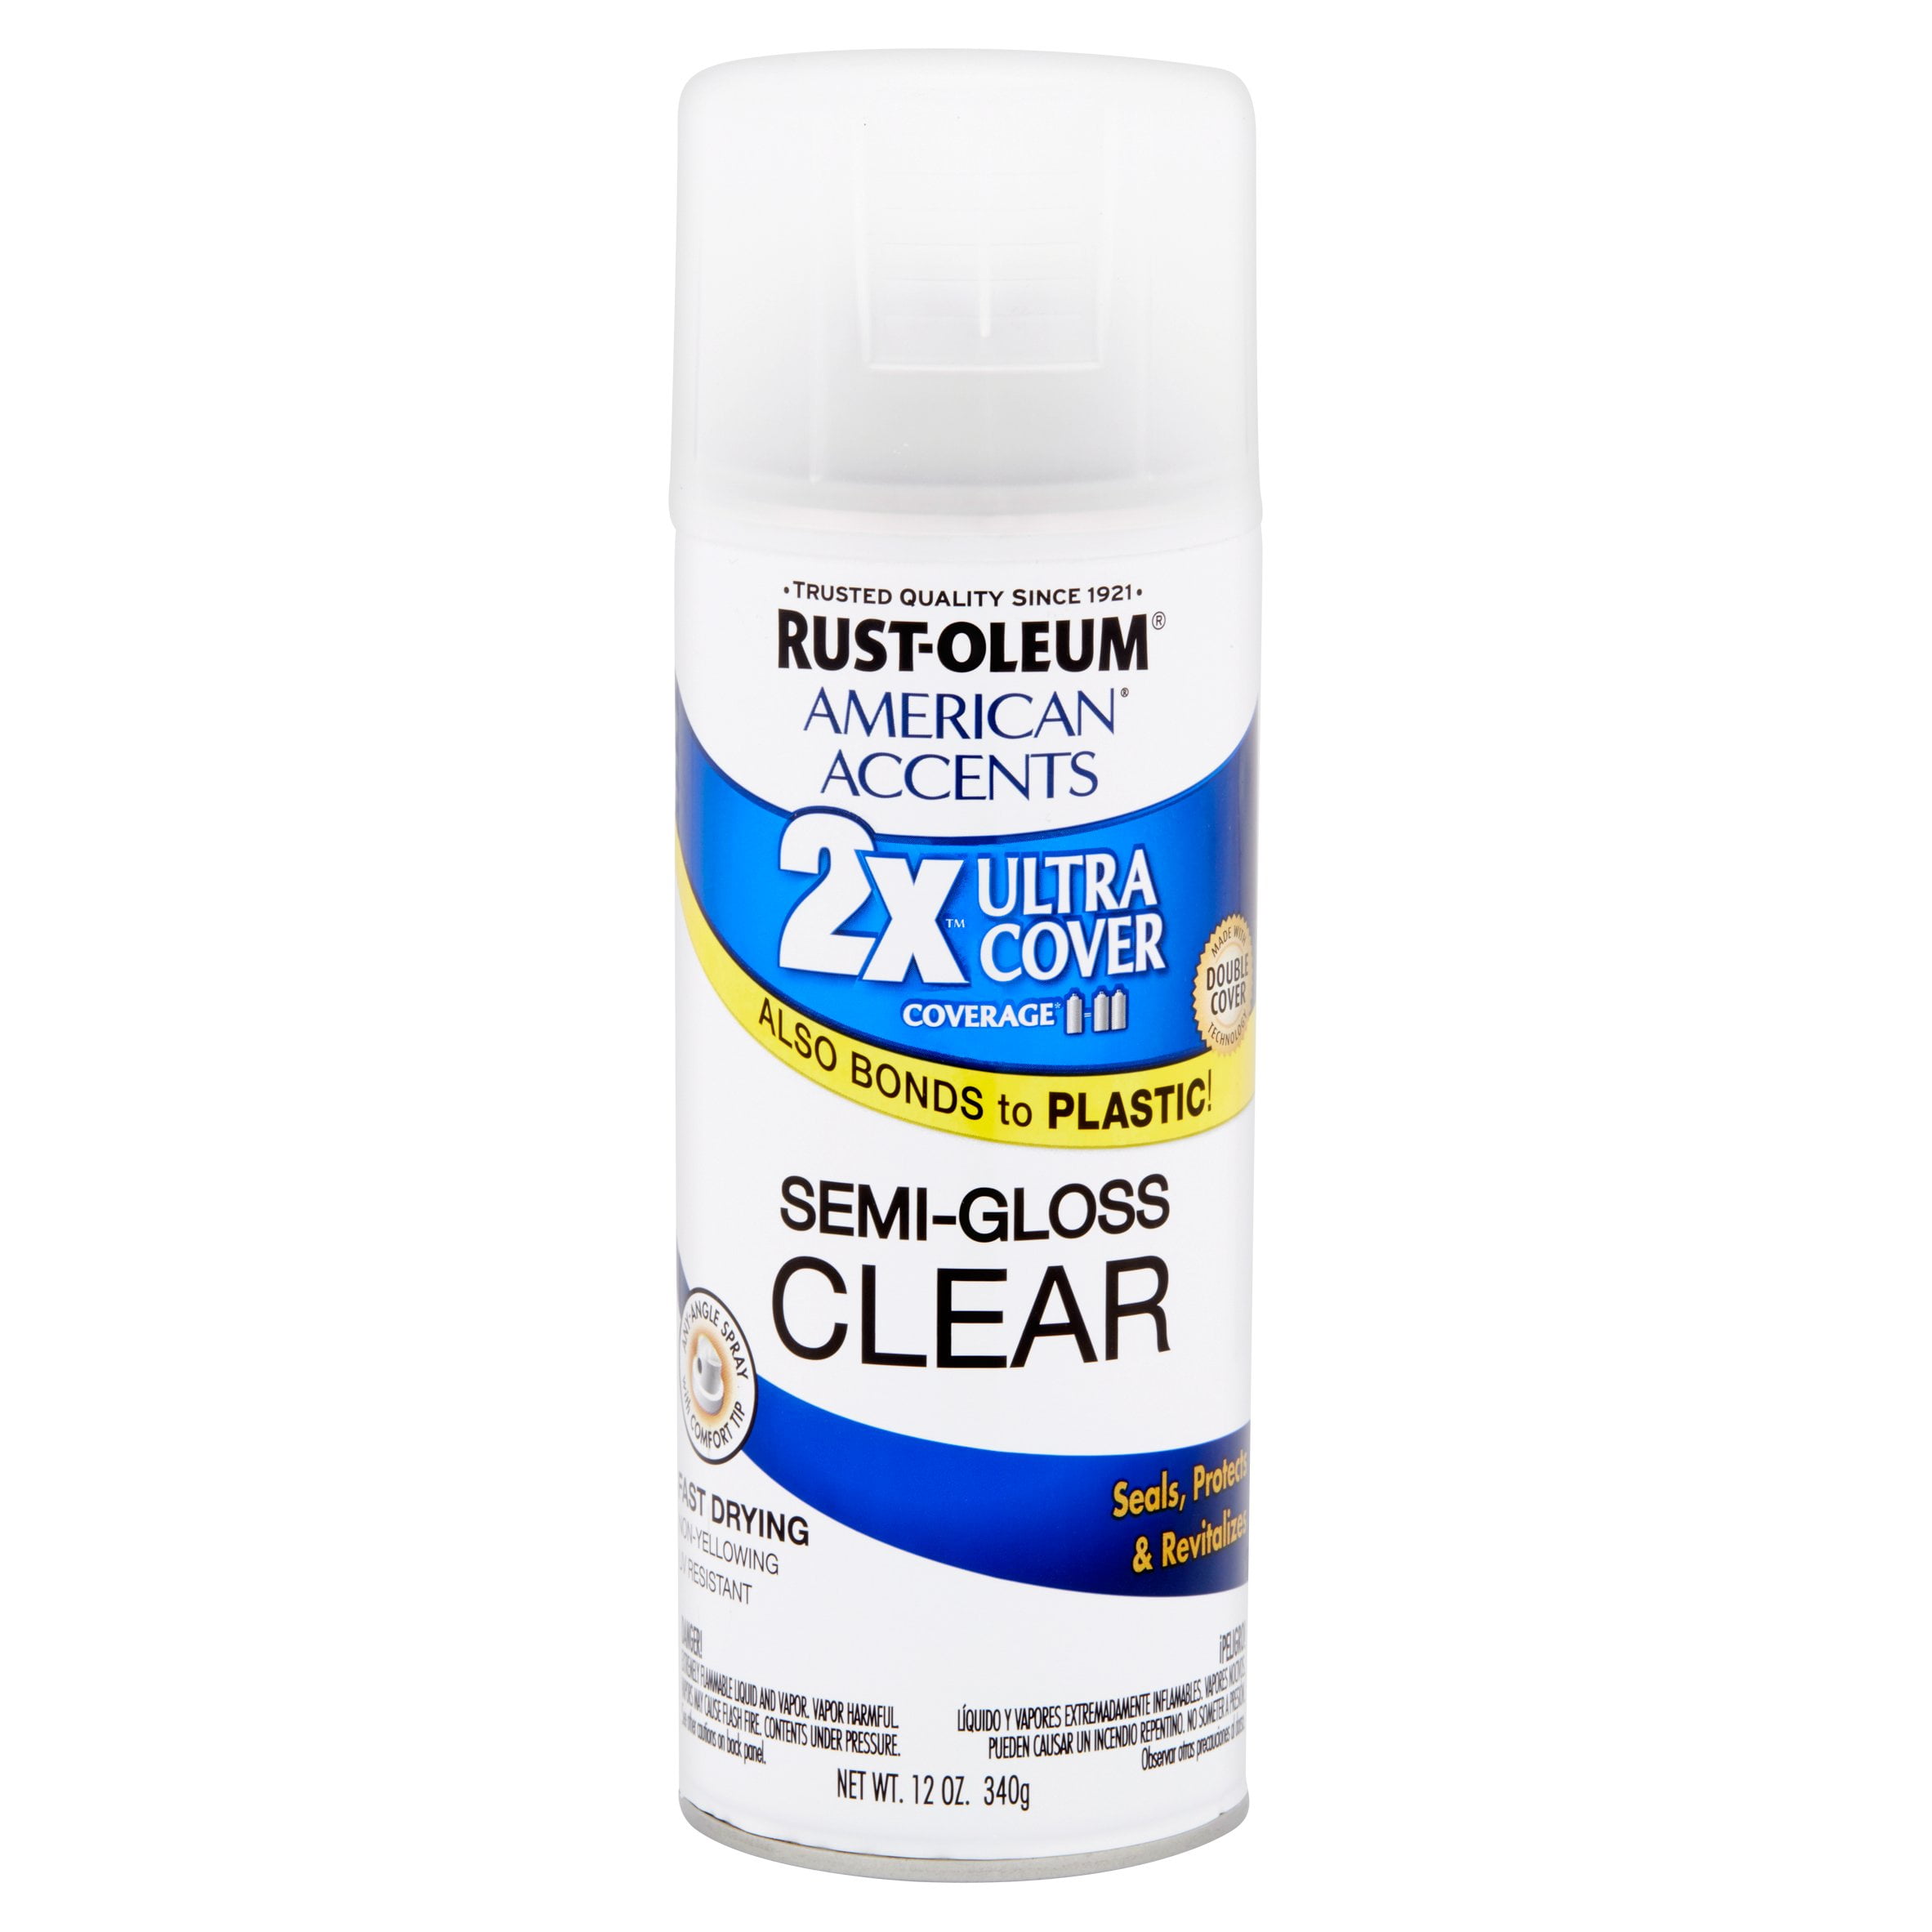 Rust-Oleum American Accents Ultra Cover 2X Semi-Gloss Spray Paint & Primer,  Clear, 12 Oz. 